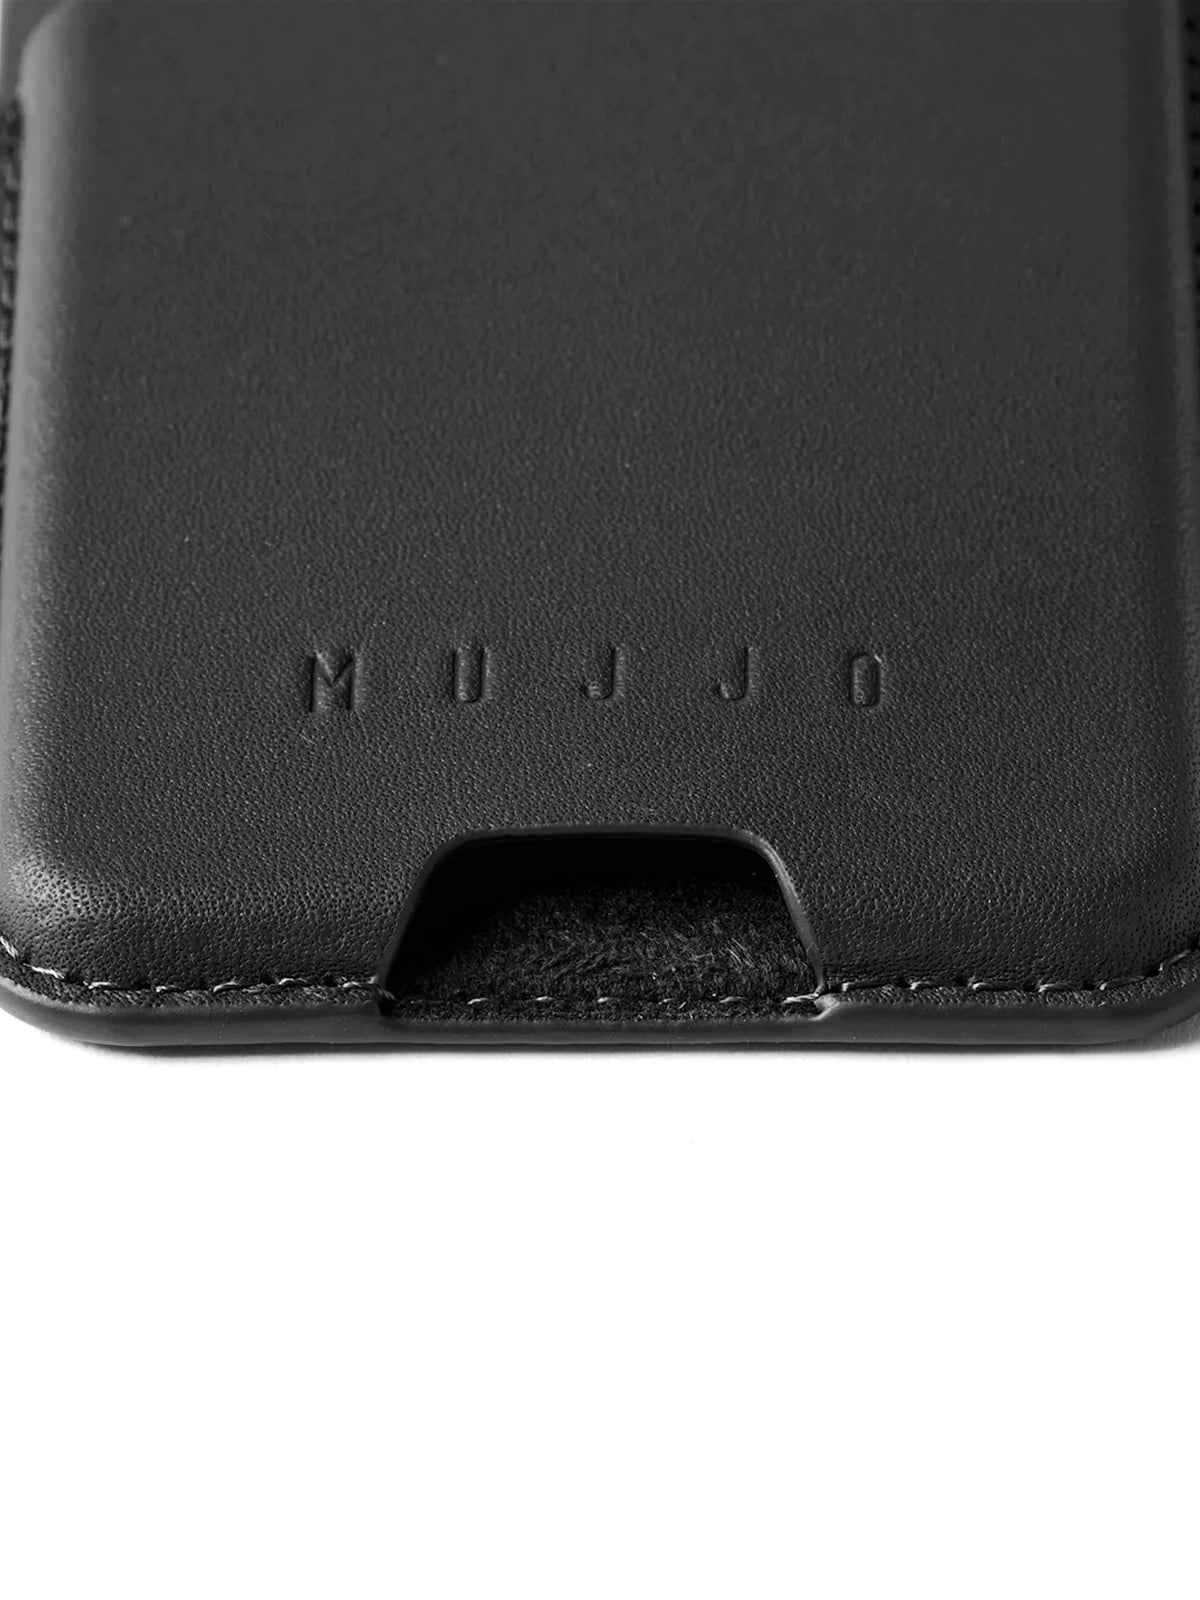 Mujjo Full Leather Magnetic Magsafe Wallet for iPhone